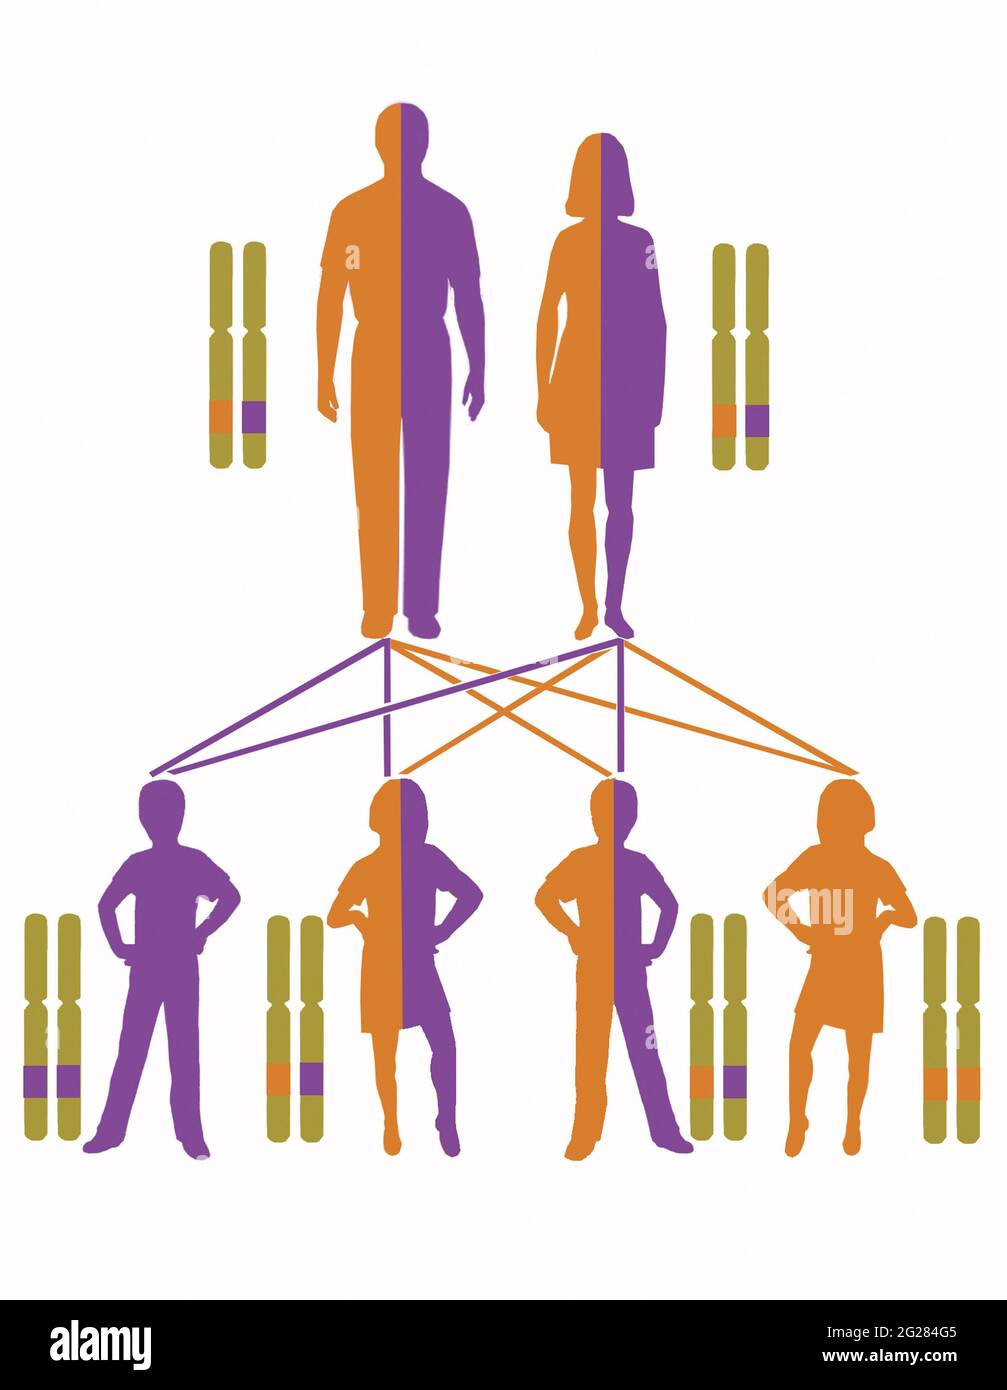 Infographic showing inheritance pattern for autosomal recessive genes. Stock Photo